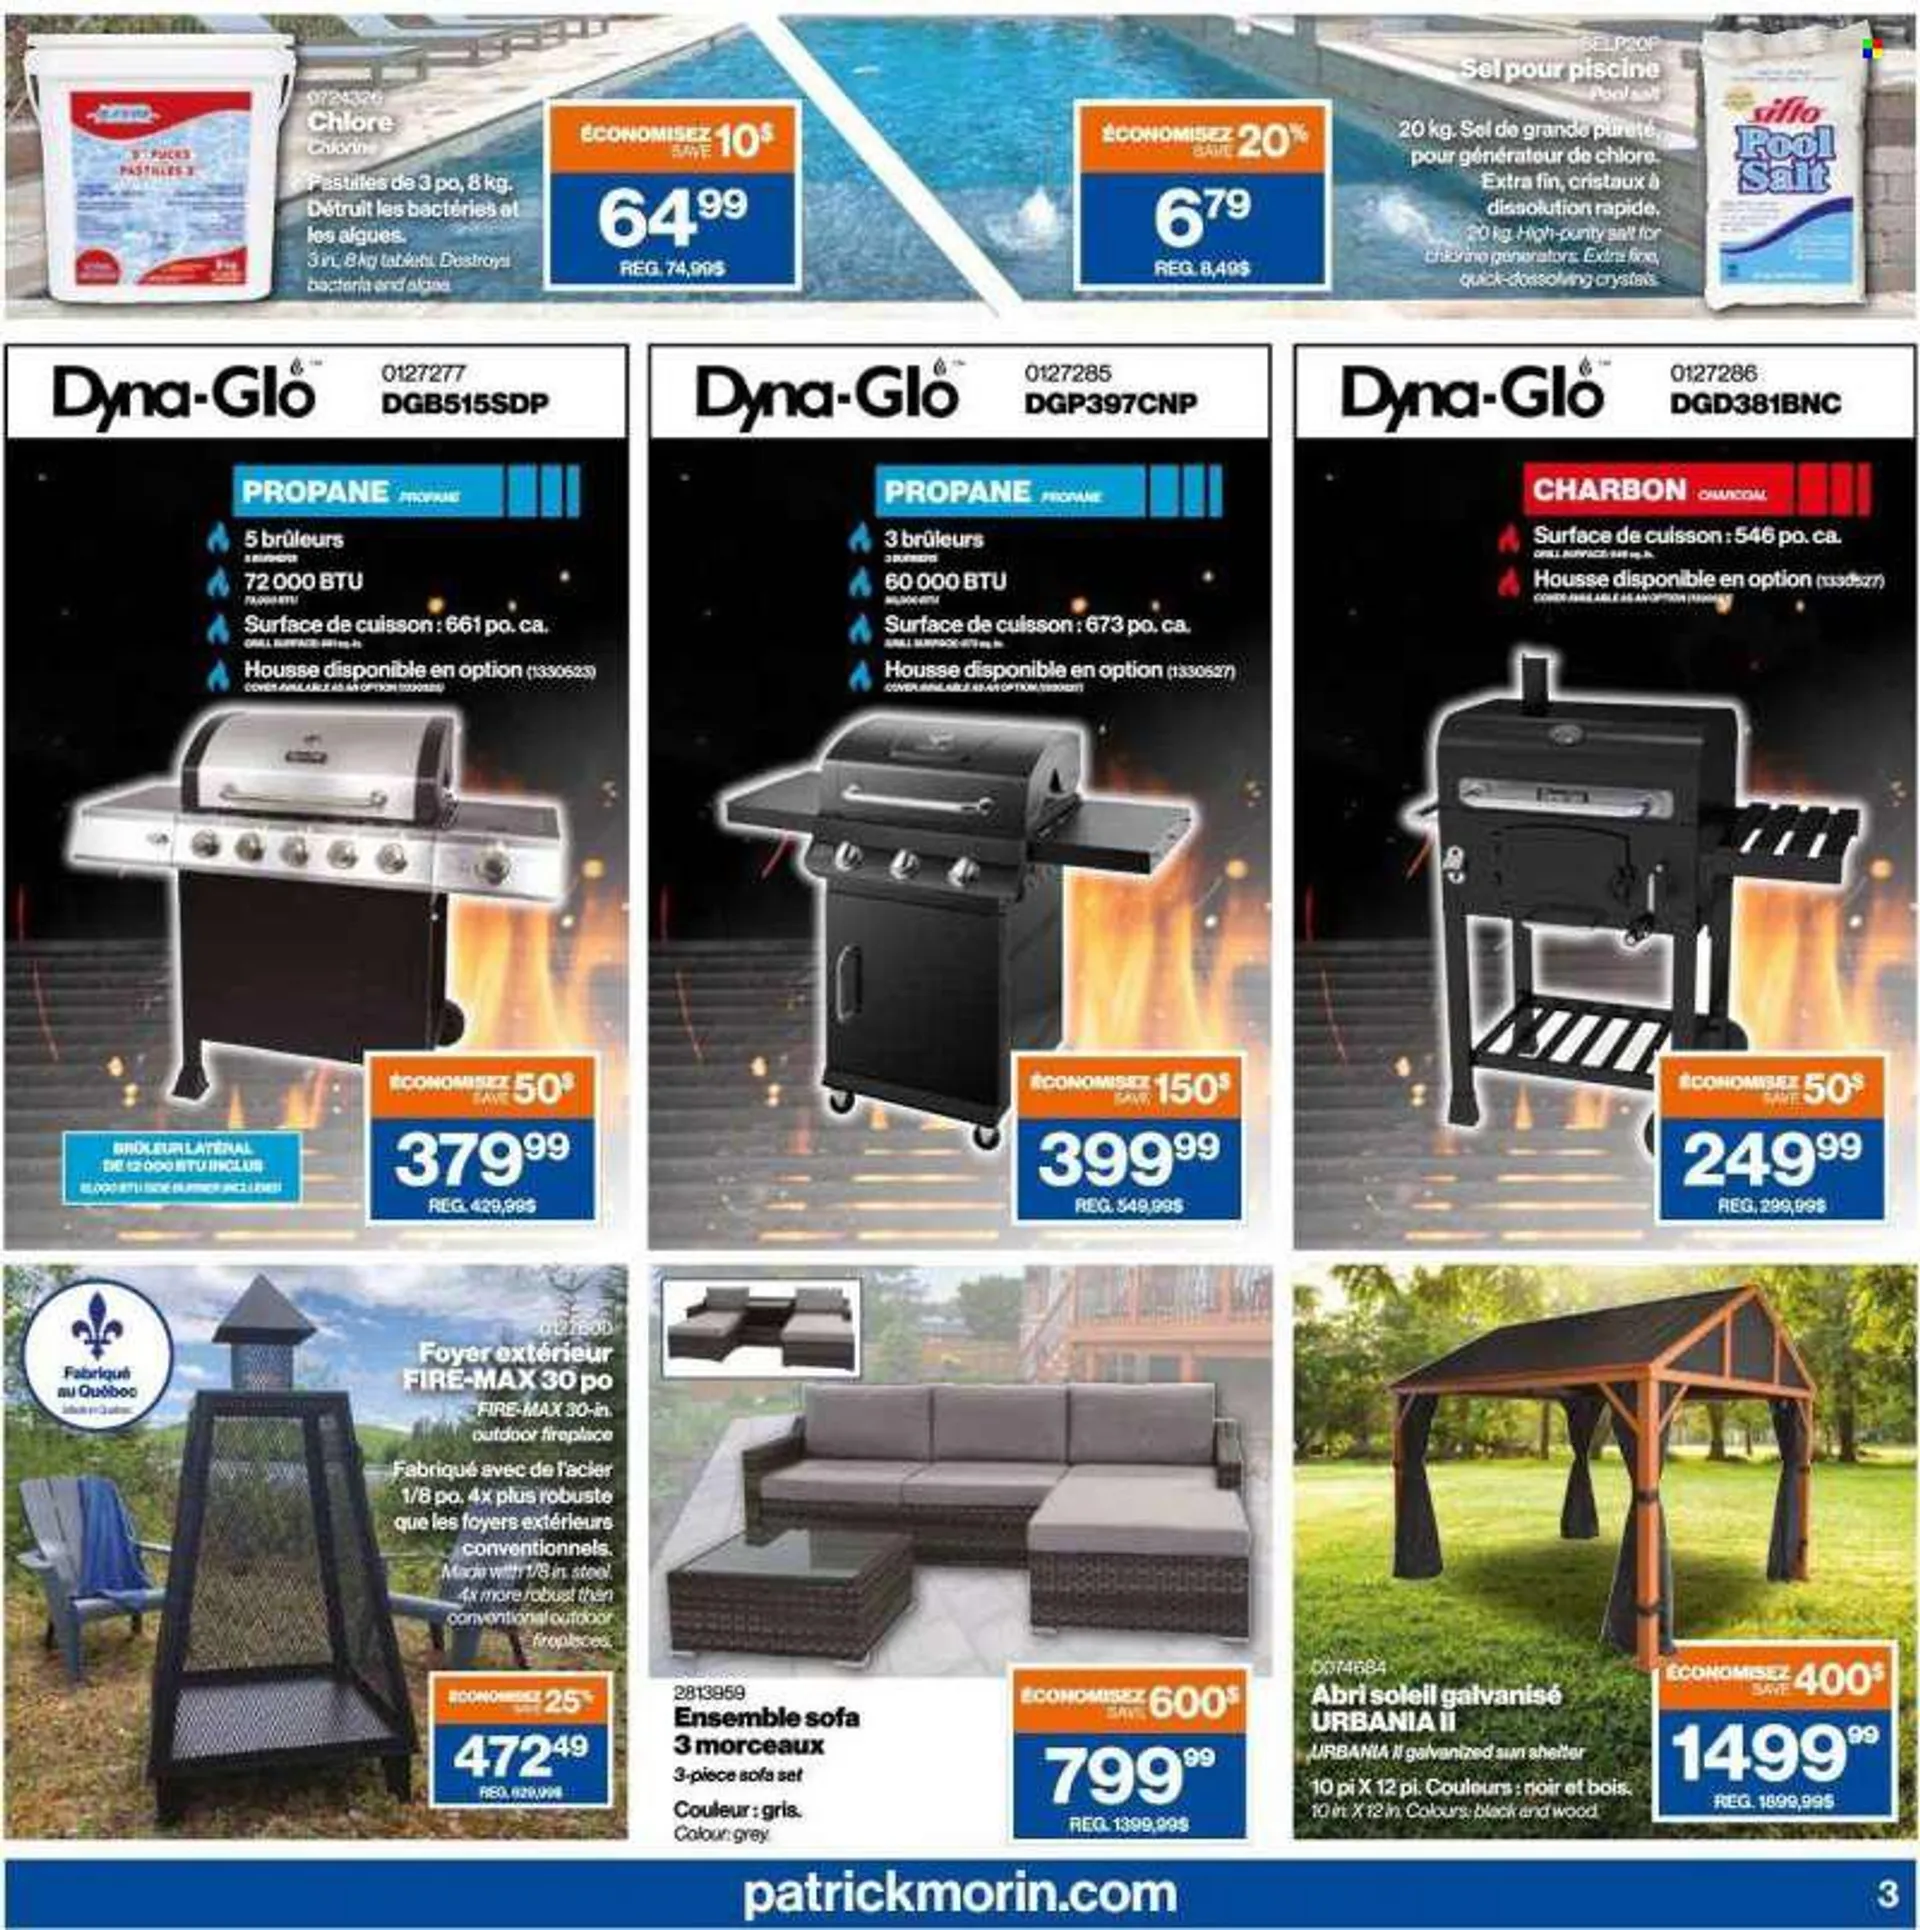 Patrick Morin Flyer - June 30, 2022 - July 06, 2022 - Sales products - 3-piece sectional, sofa, fireplace, grill, pool salt. Page 3.